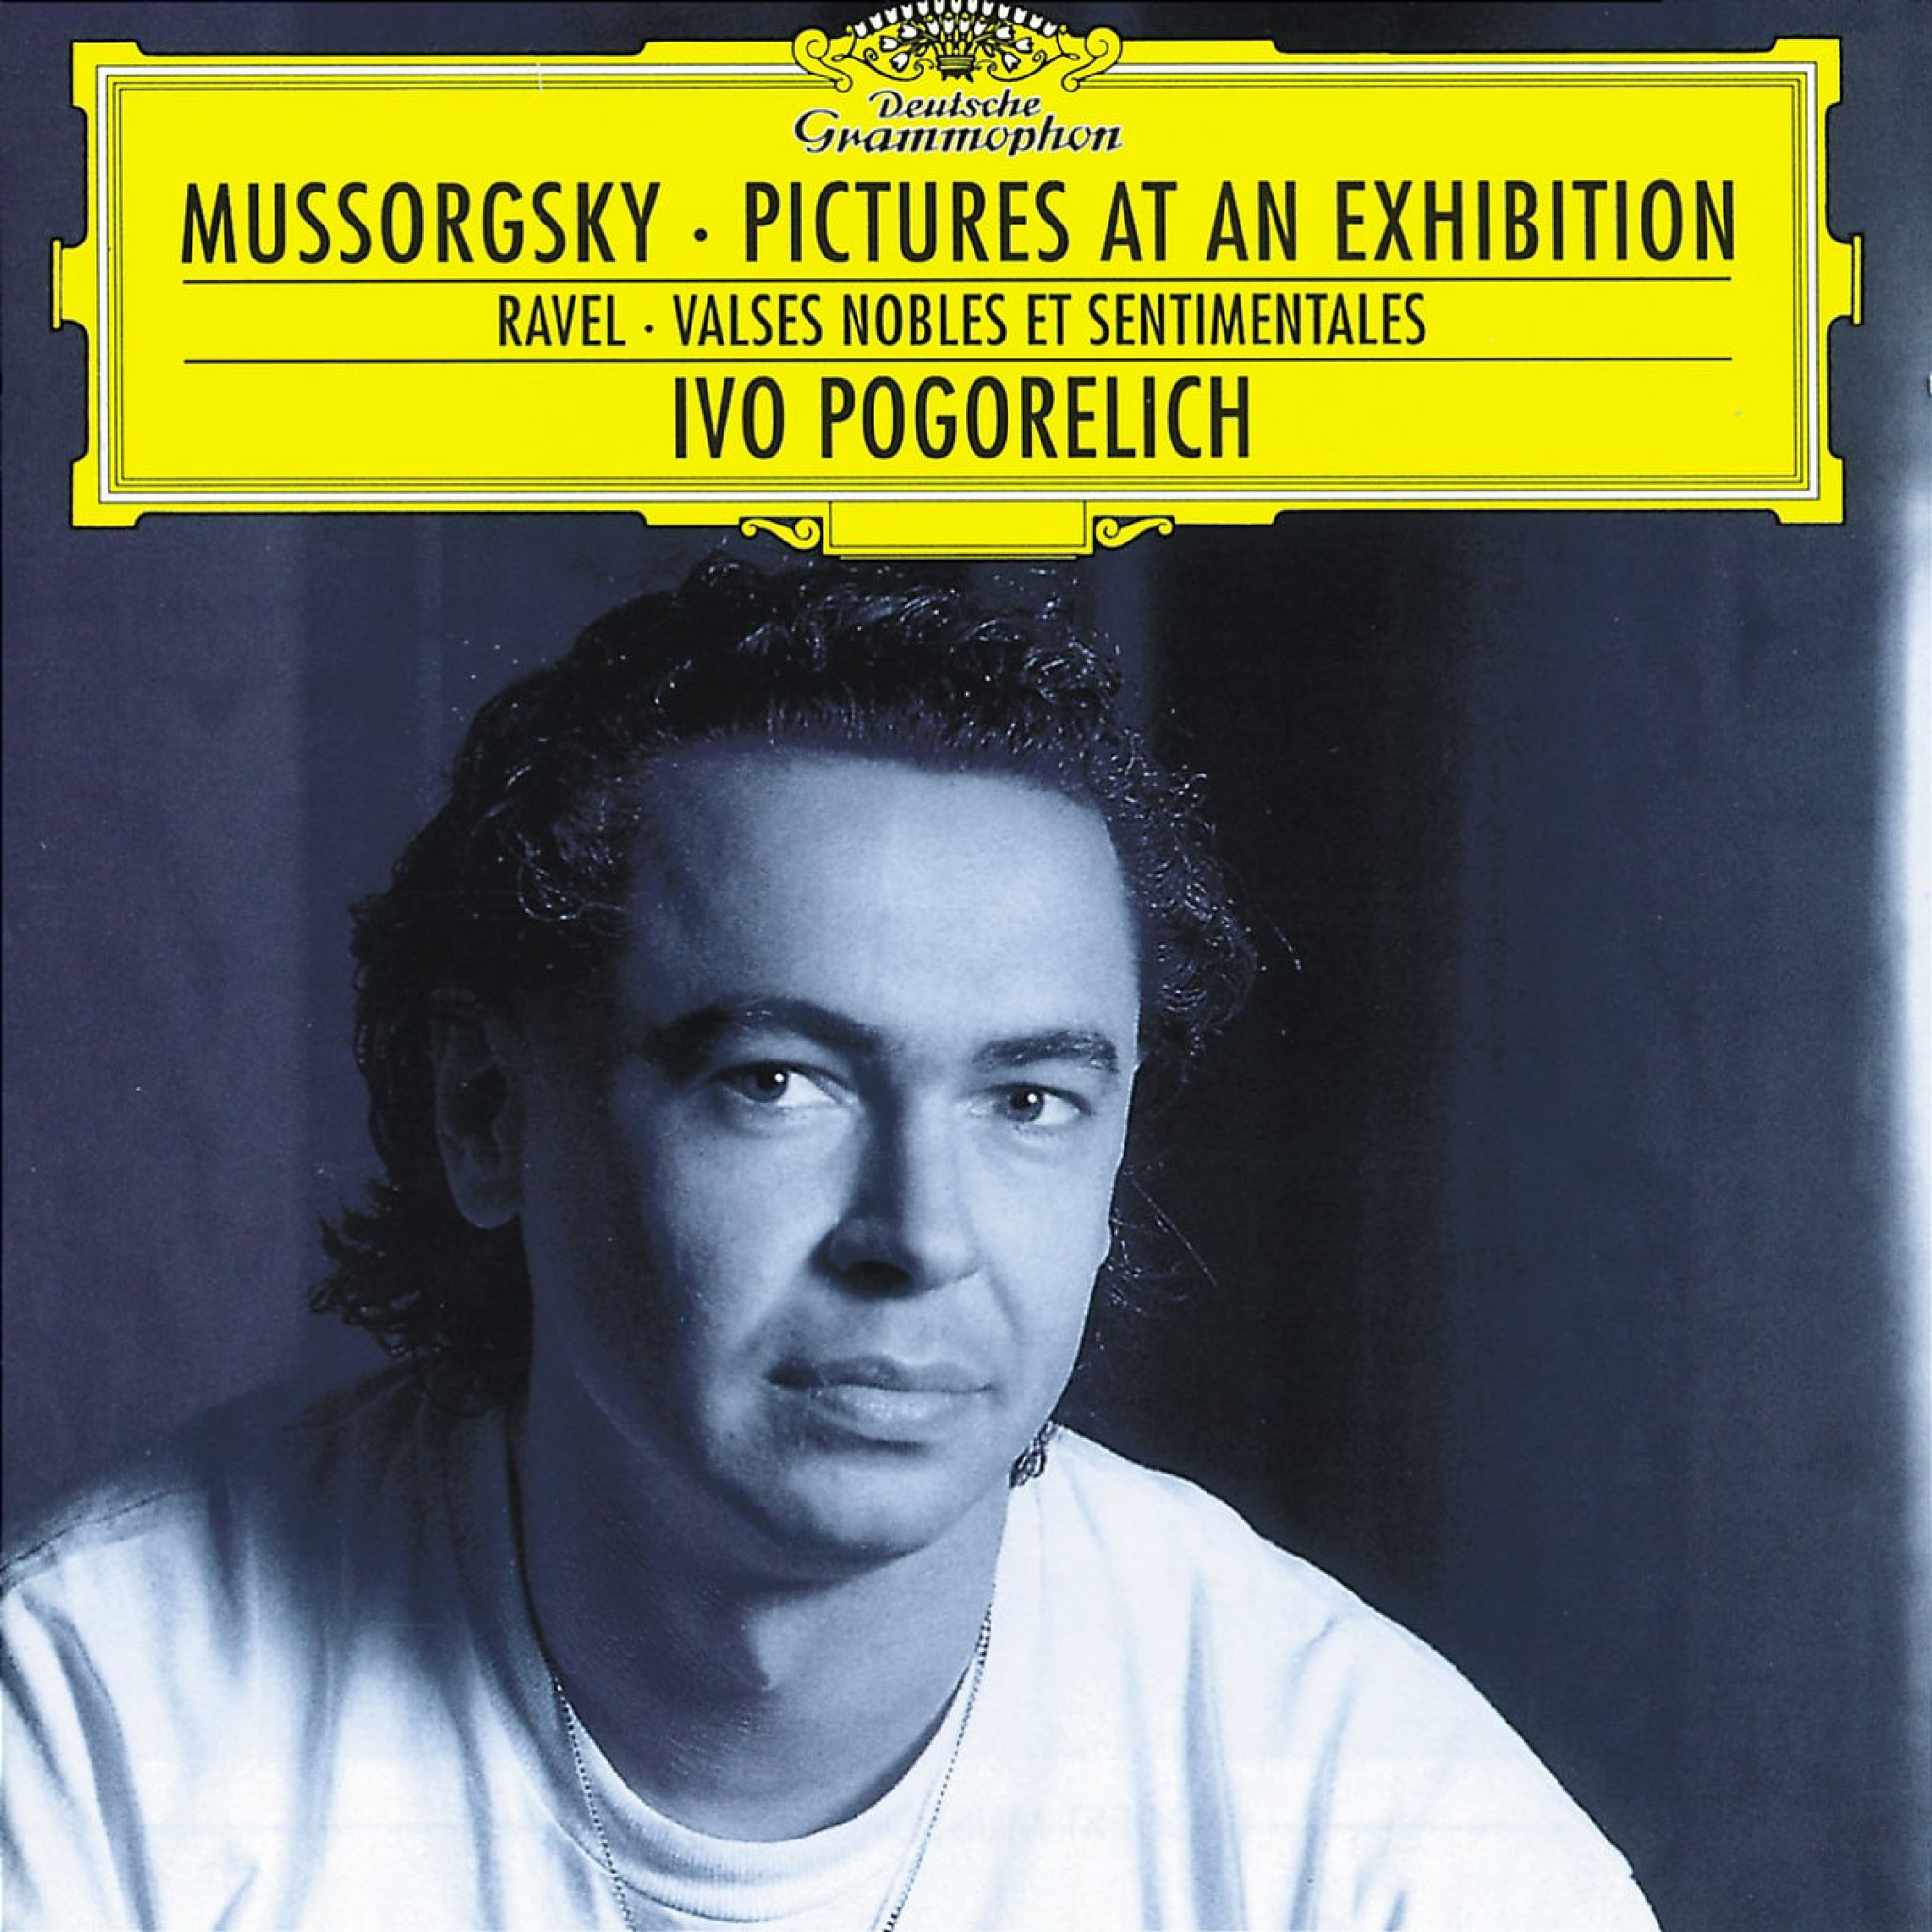 Mussorgsky: Pictures at an Exhibition / Ravel: Valses nobles 0028943766728